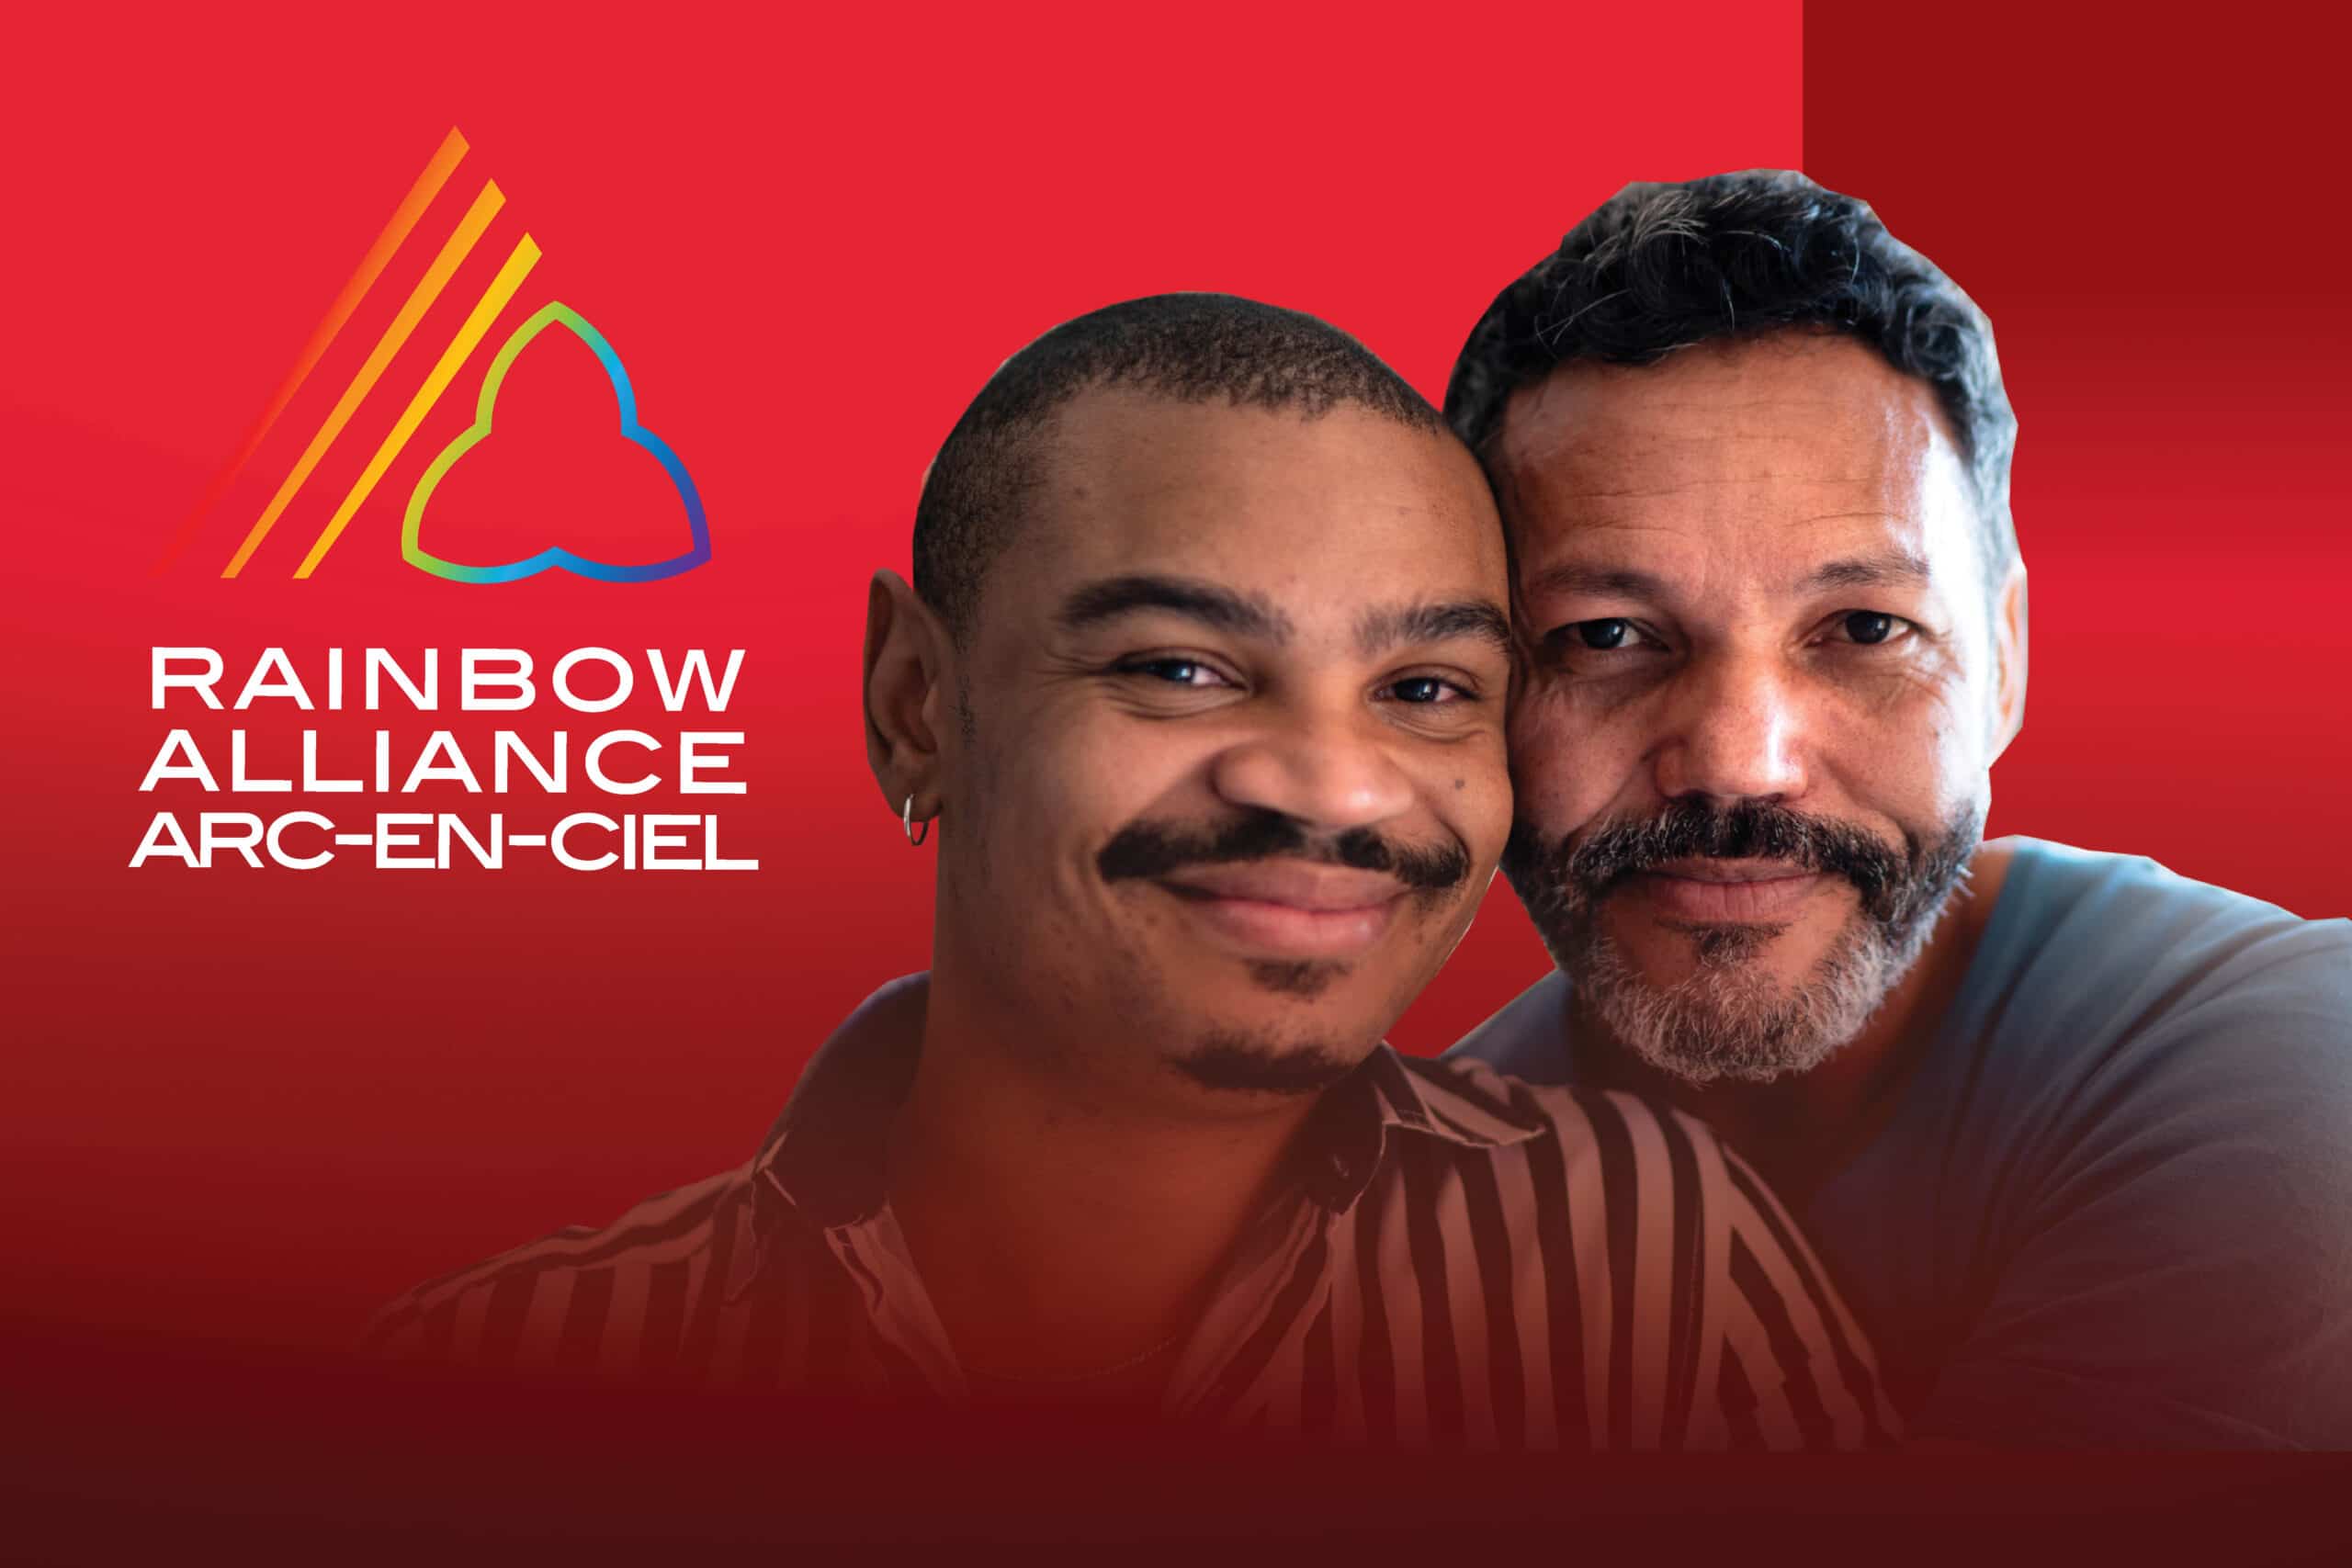 Two men close together smiling for the camera beside the Rainbow Alliance logo.